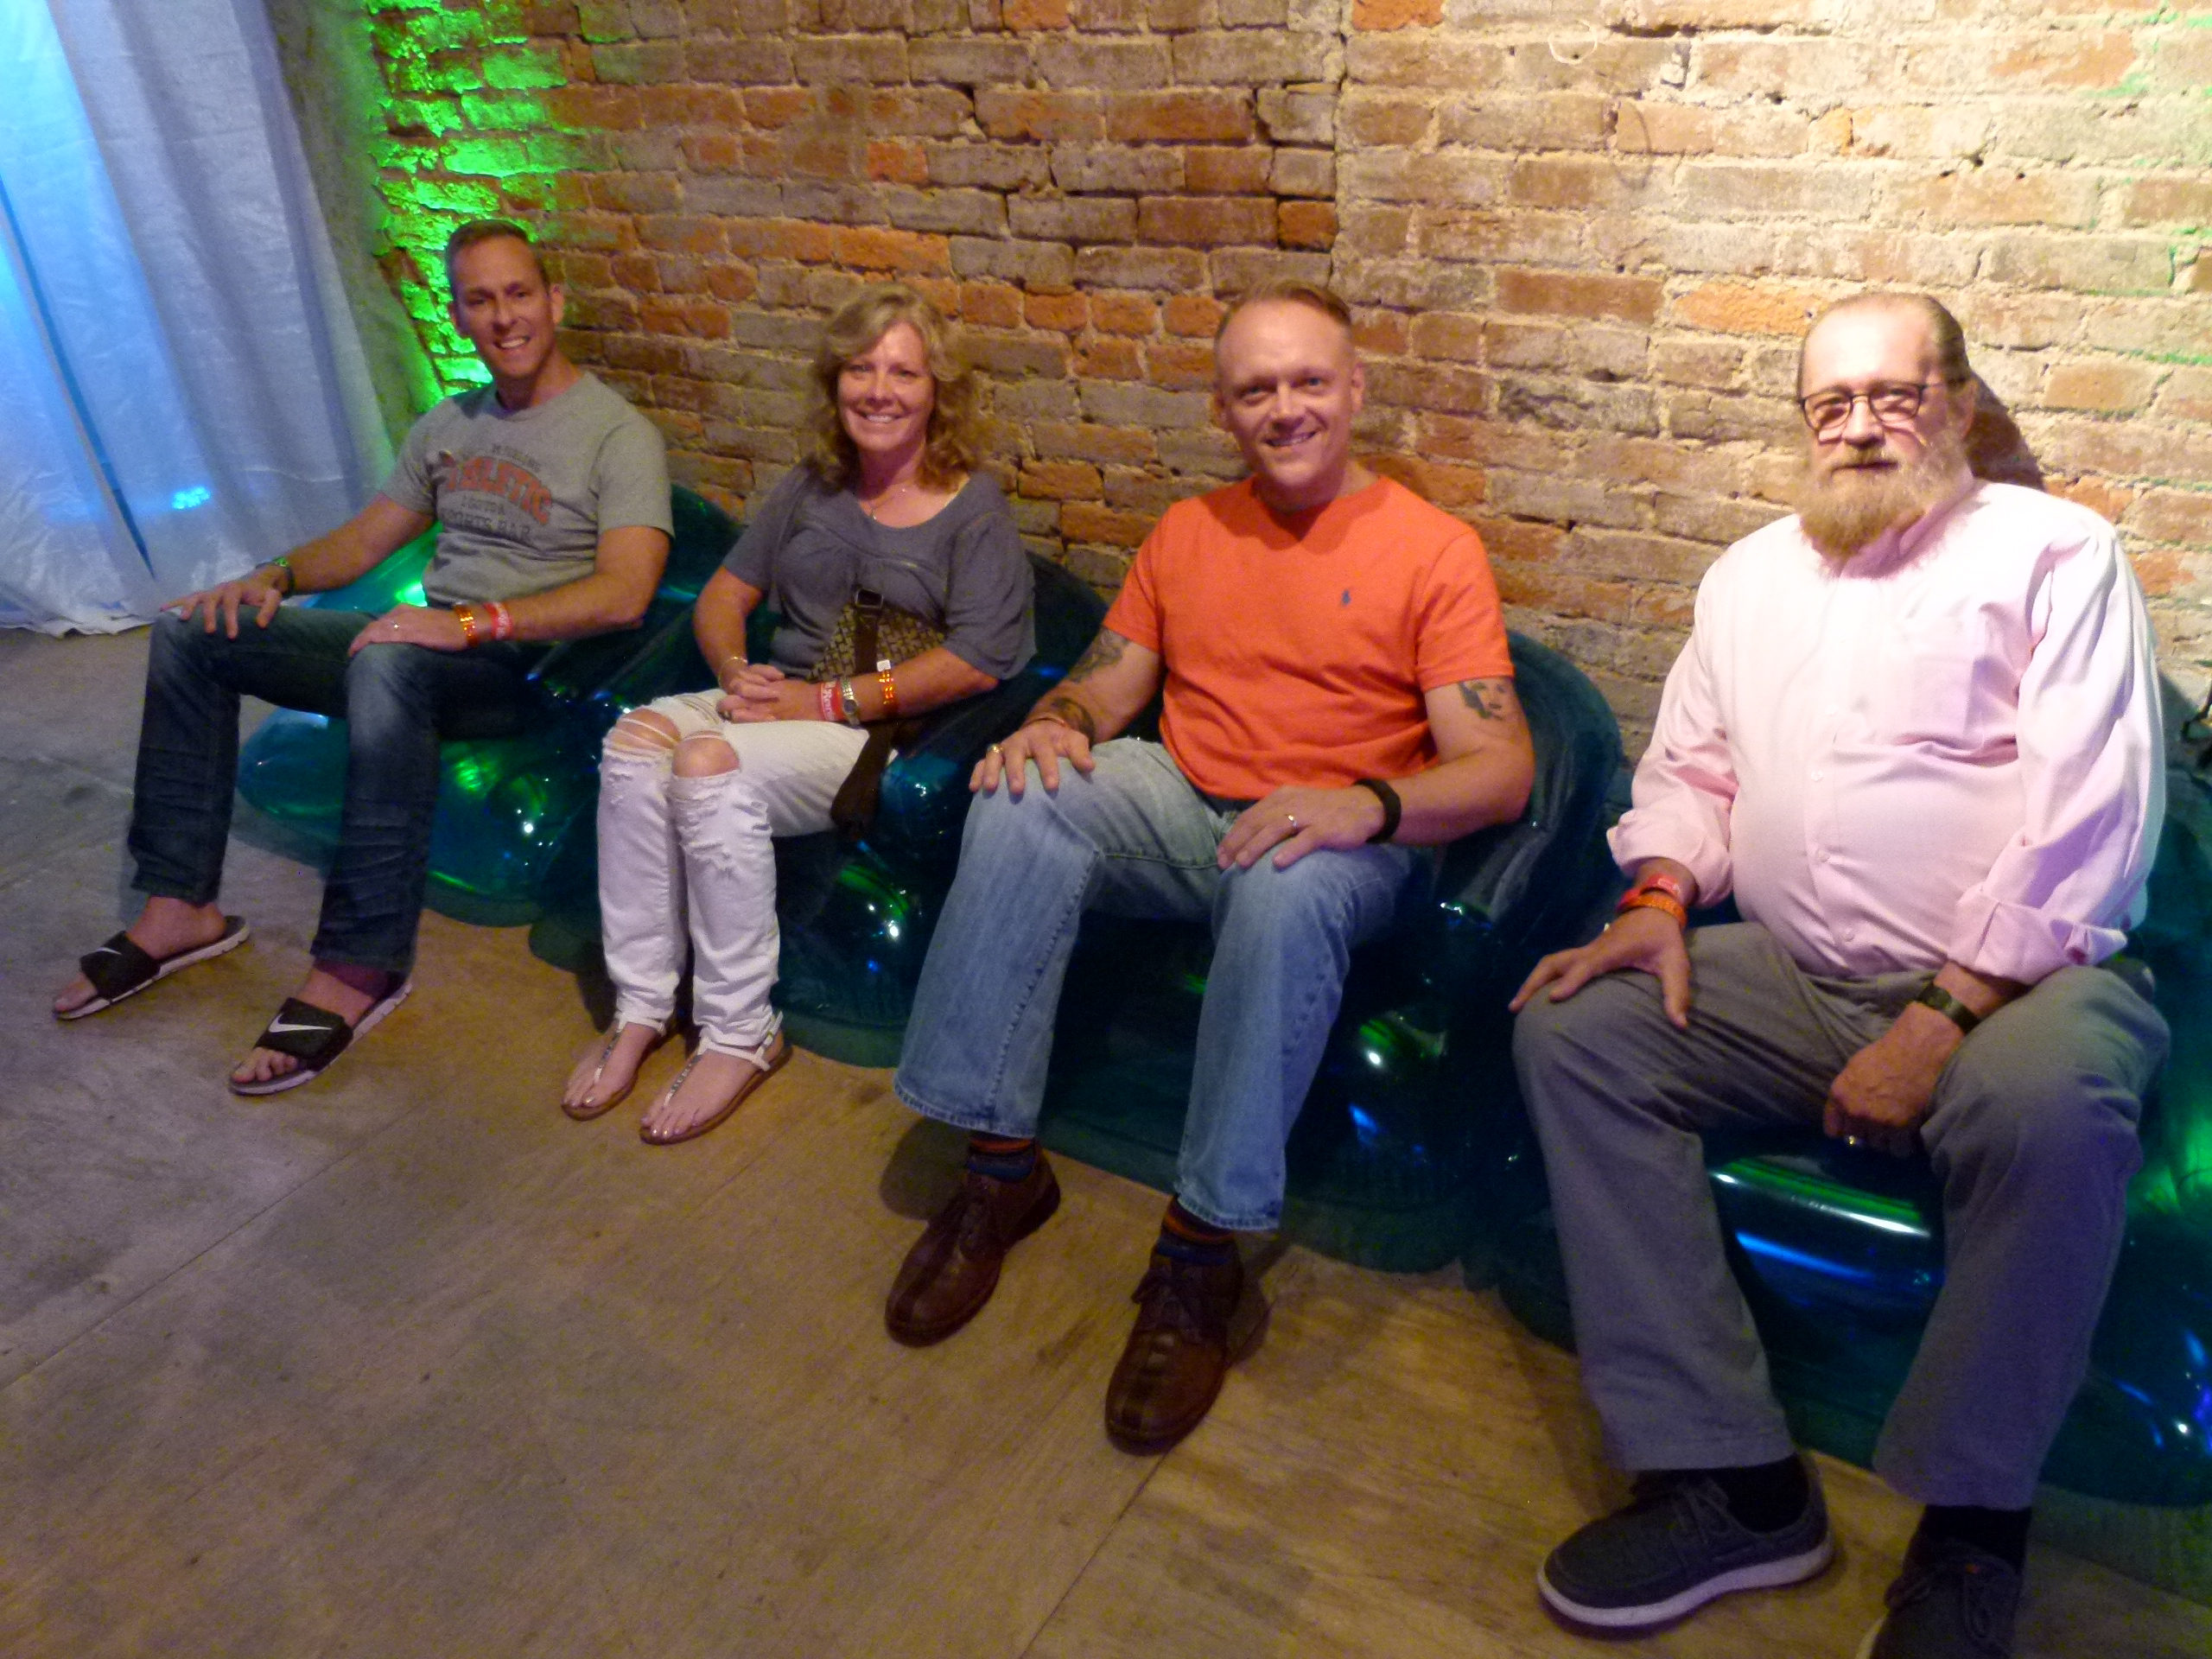 Guests relaxing on blue bubble chairs: (l. to r.) Eric Horwith, Chris Schuette, John Komisary, and Dennis Wilson.